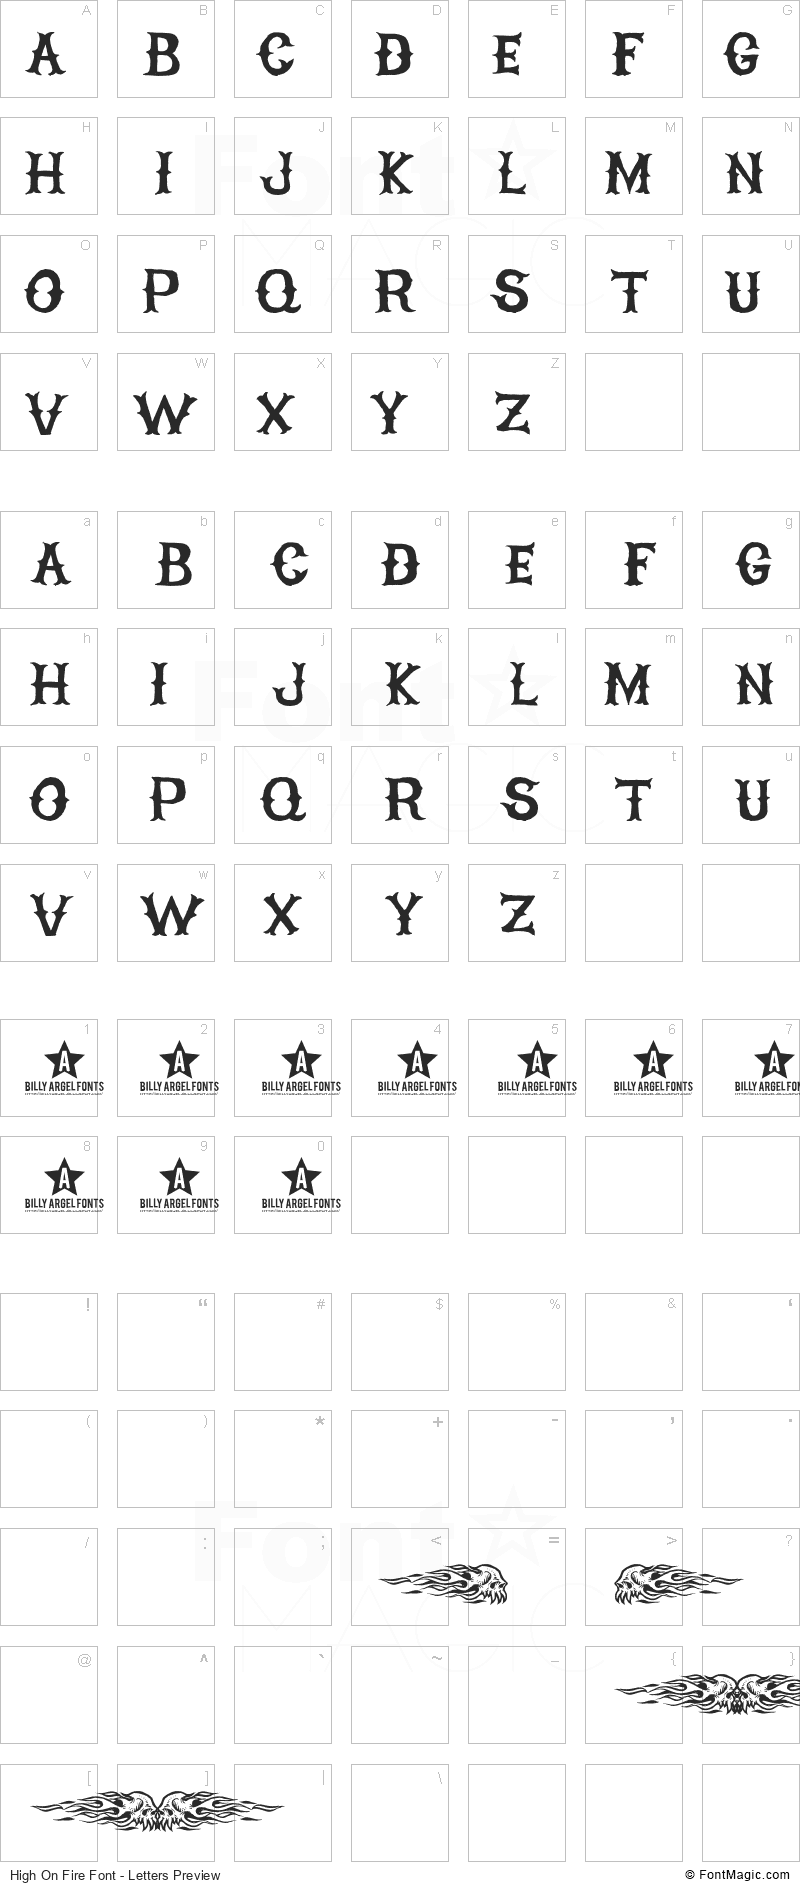 High On Fire Font - All Latters Preview Chart